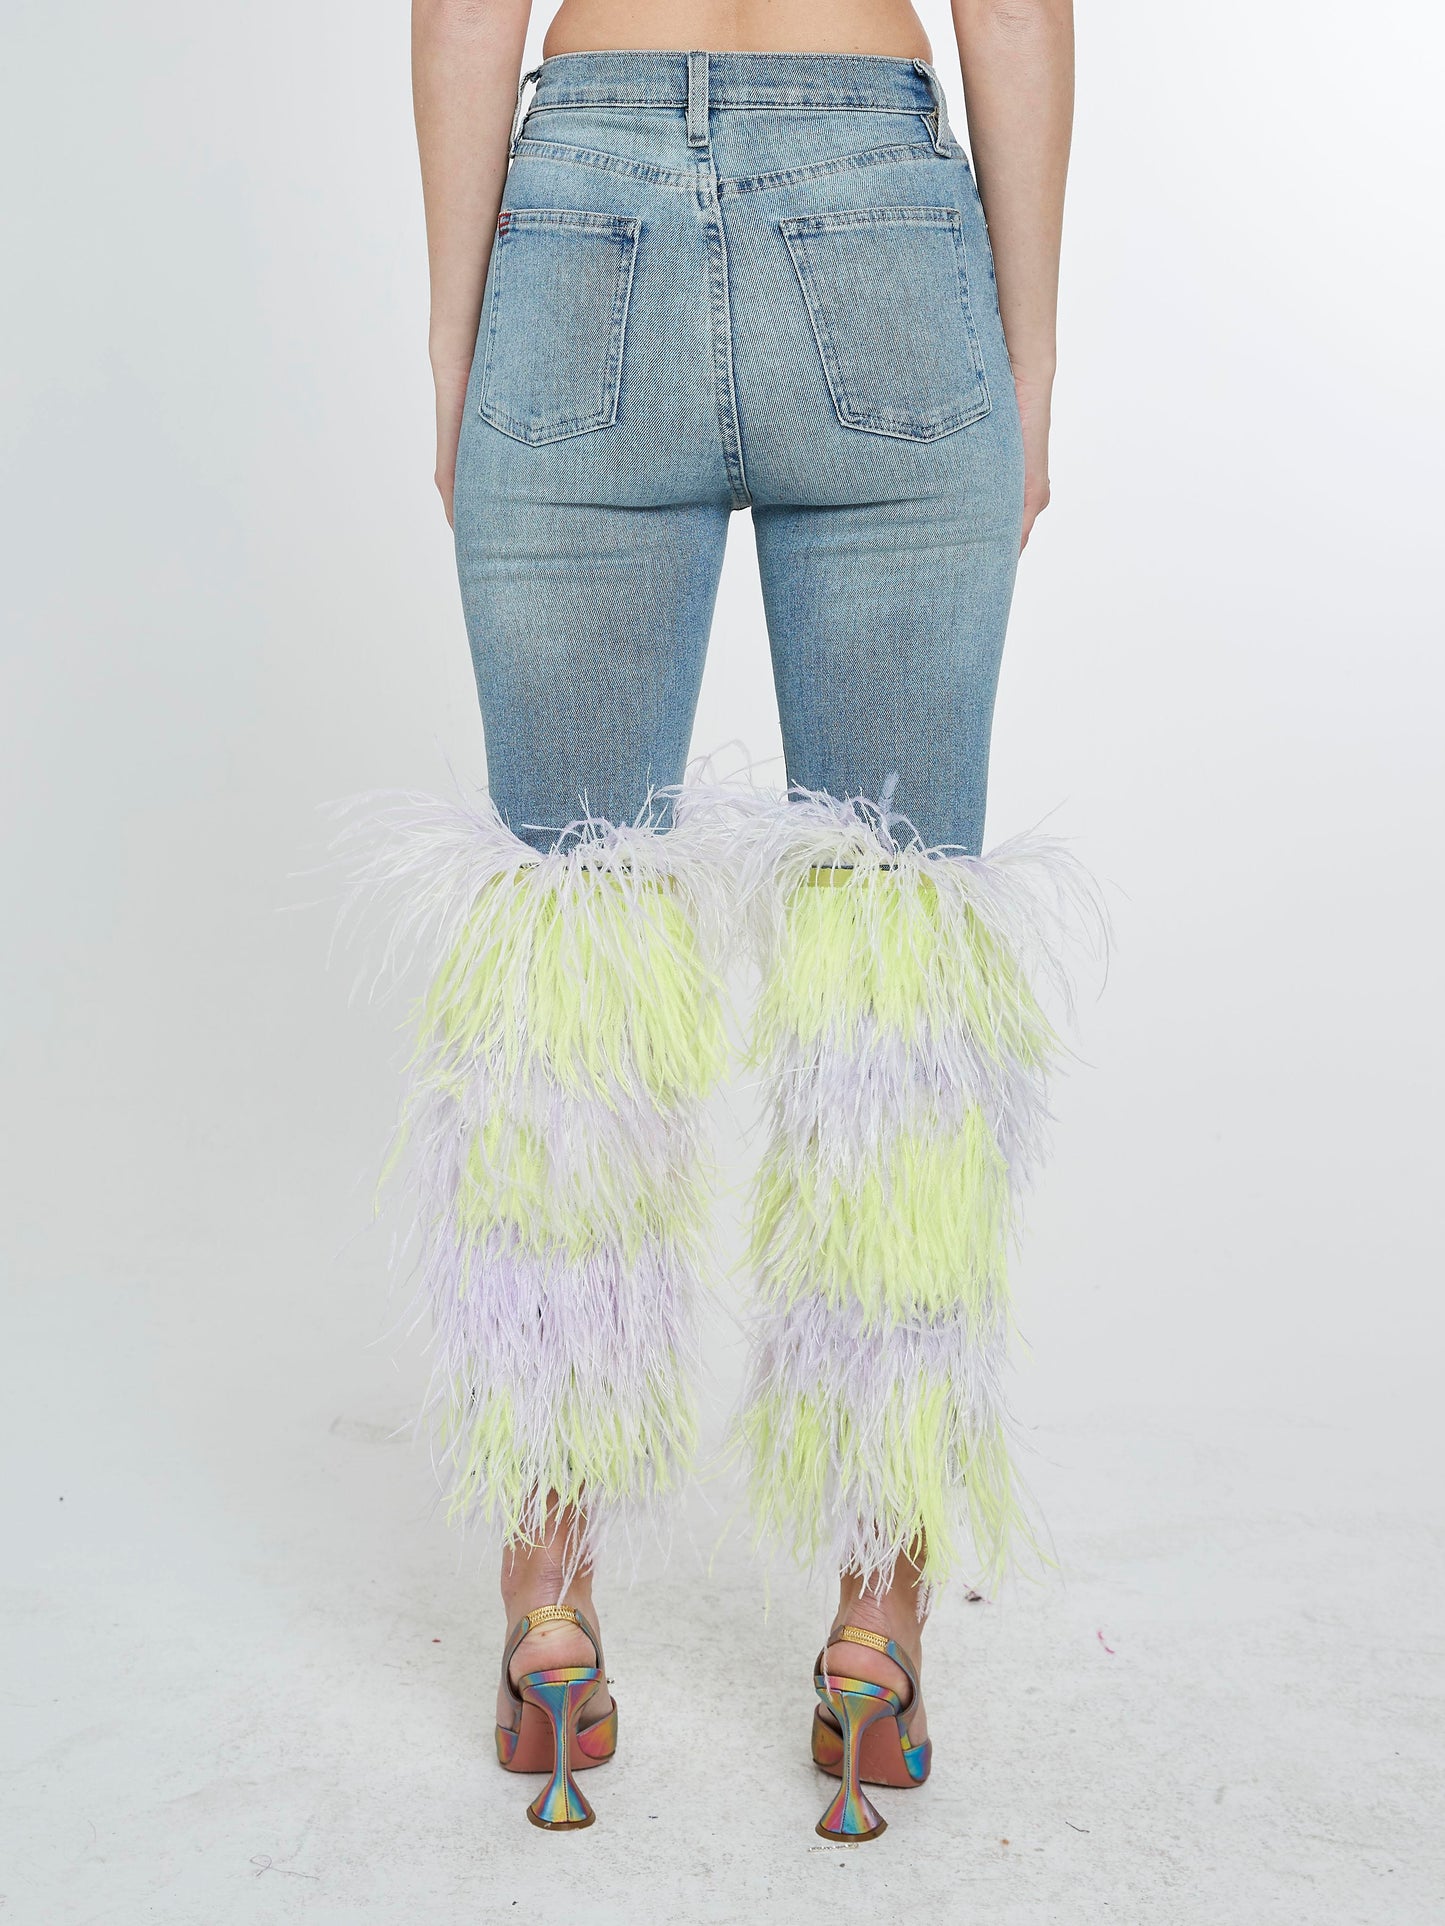 Jeans with neon yellow and purple feathers fringe